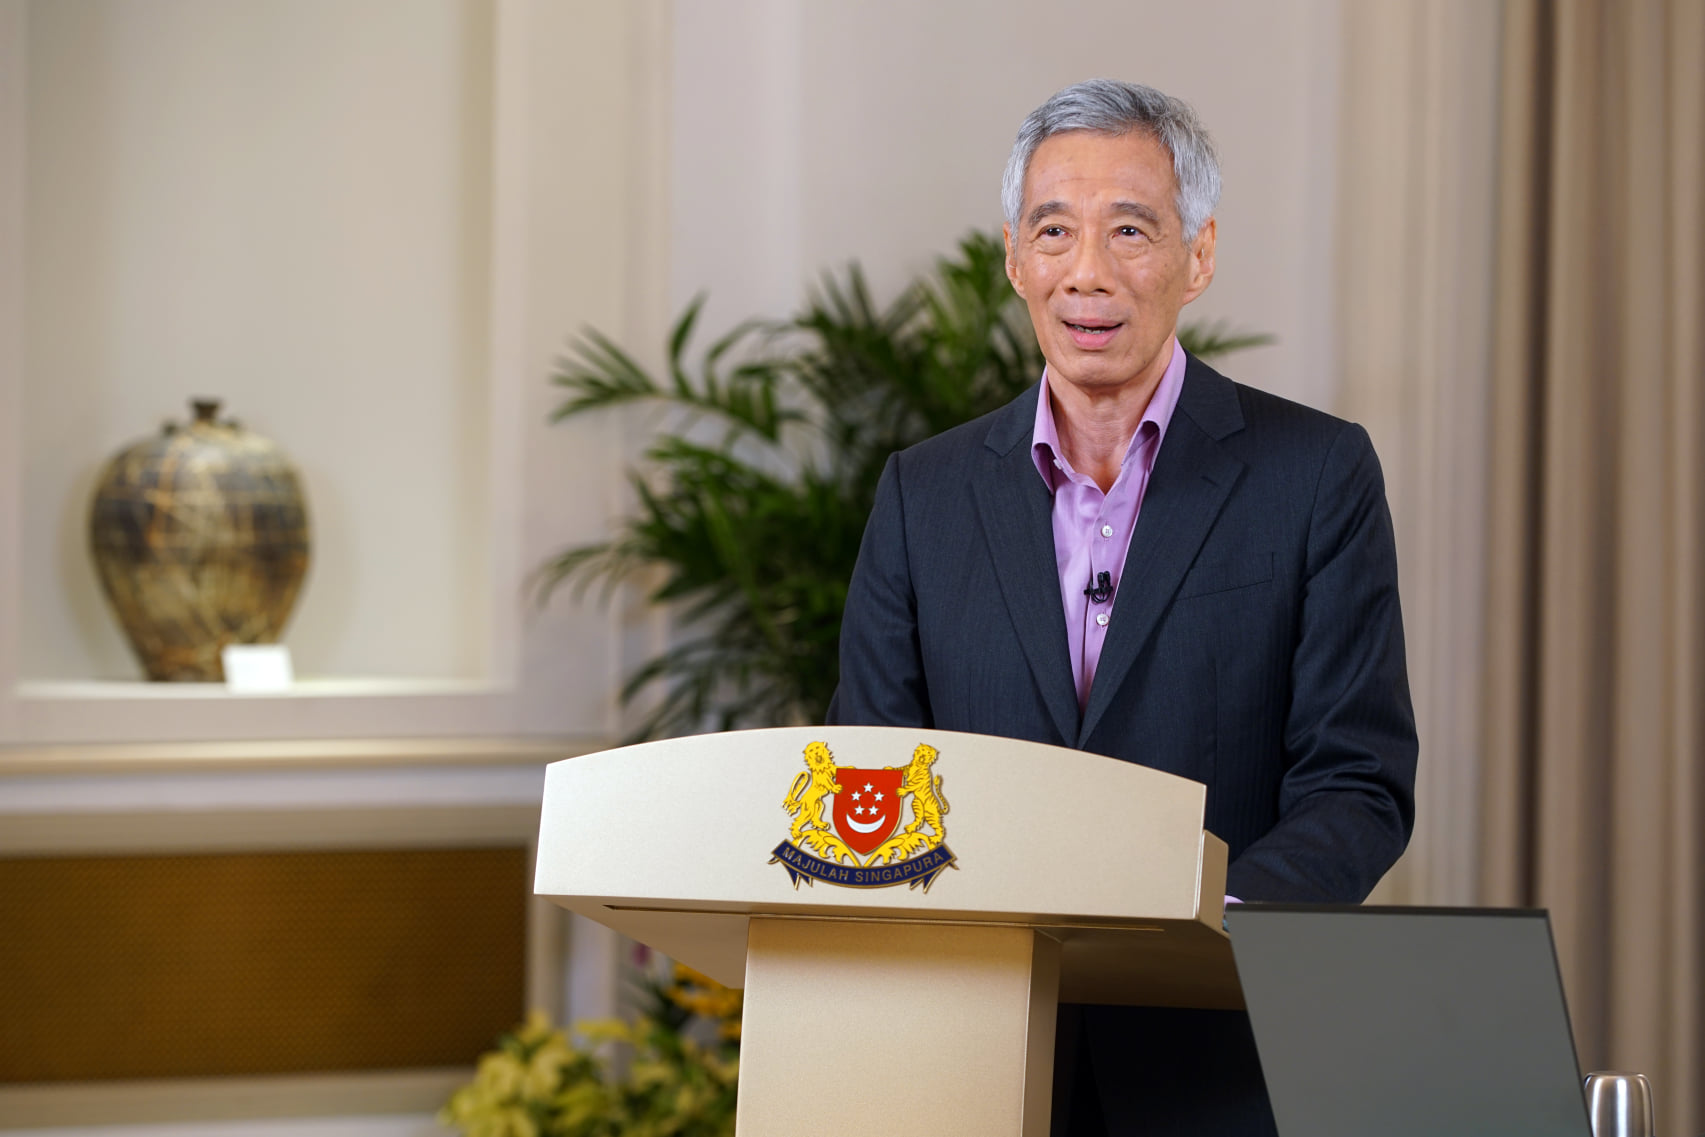 Prime Minister Lee Hsien Loong had a speech broadcast live to the nation on May 31. Image courtesy of Lee Hsien Loong.